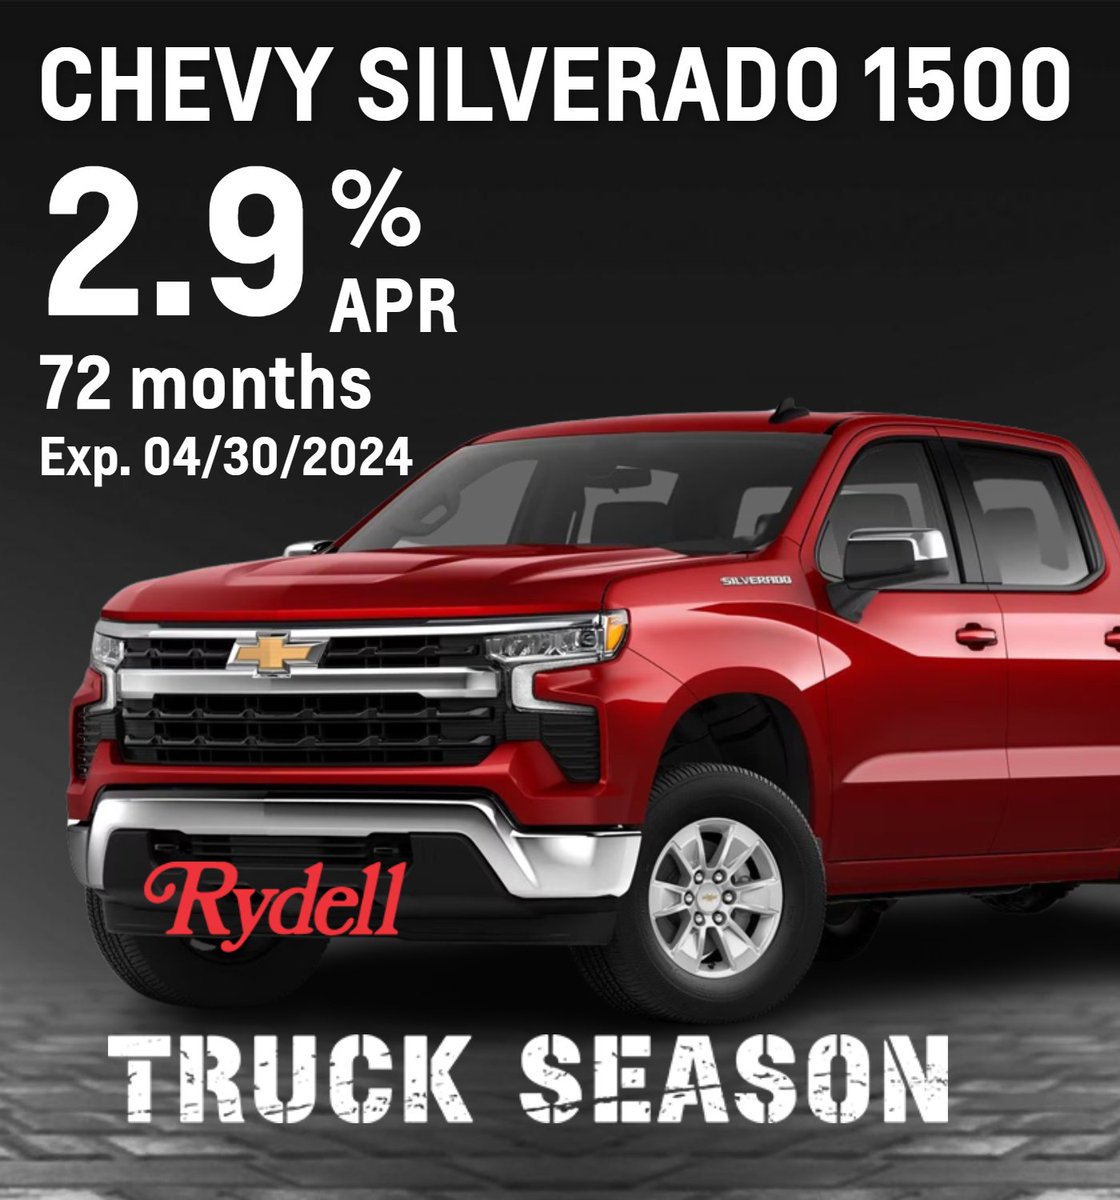 It is TRUCK SEASON! Great Opportunity and Selection on #Chevrolet #Silverado #1500, many Trims and Packages available at Rydell Chevrolet in Grand Forks! Call or Text today at 701-772-7211.